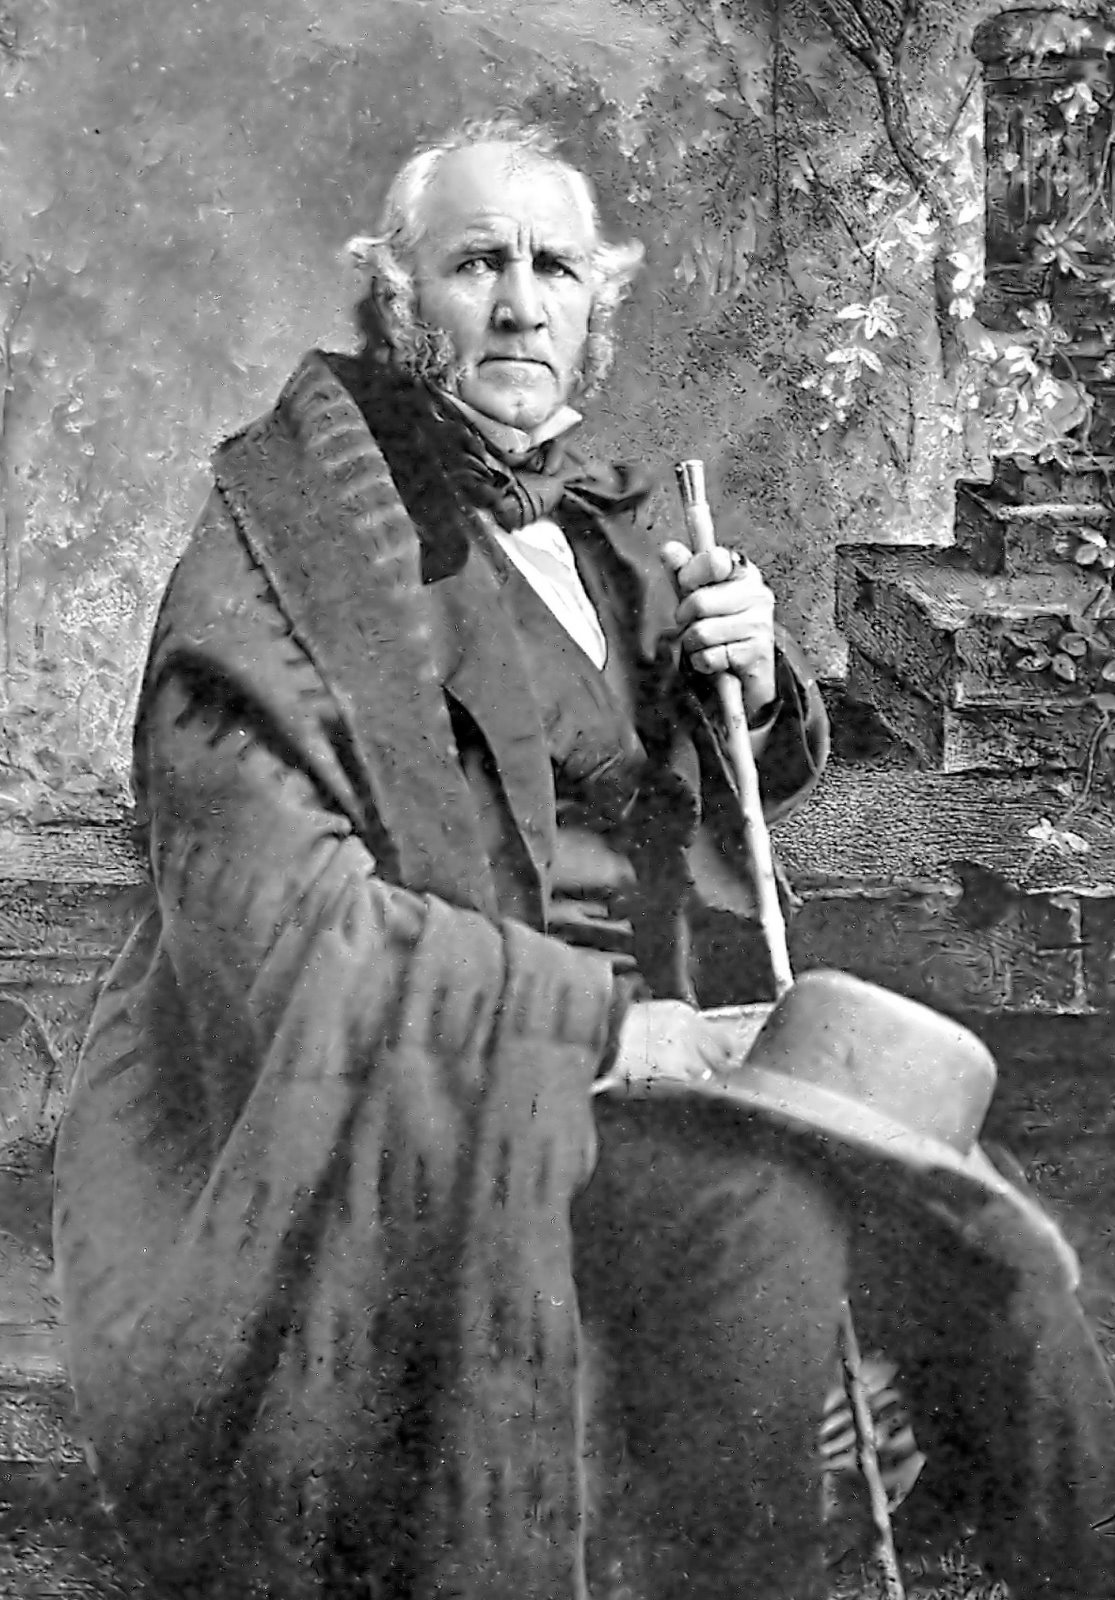 Sam Houston is elected as the first president of the Republic of Texas